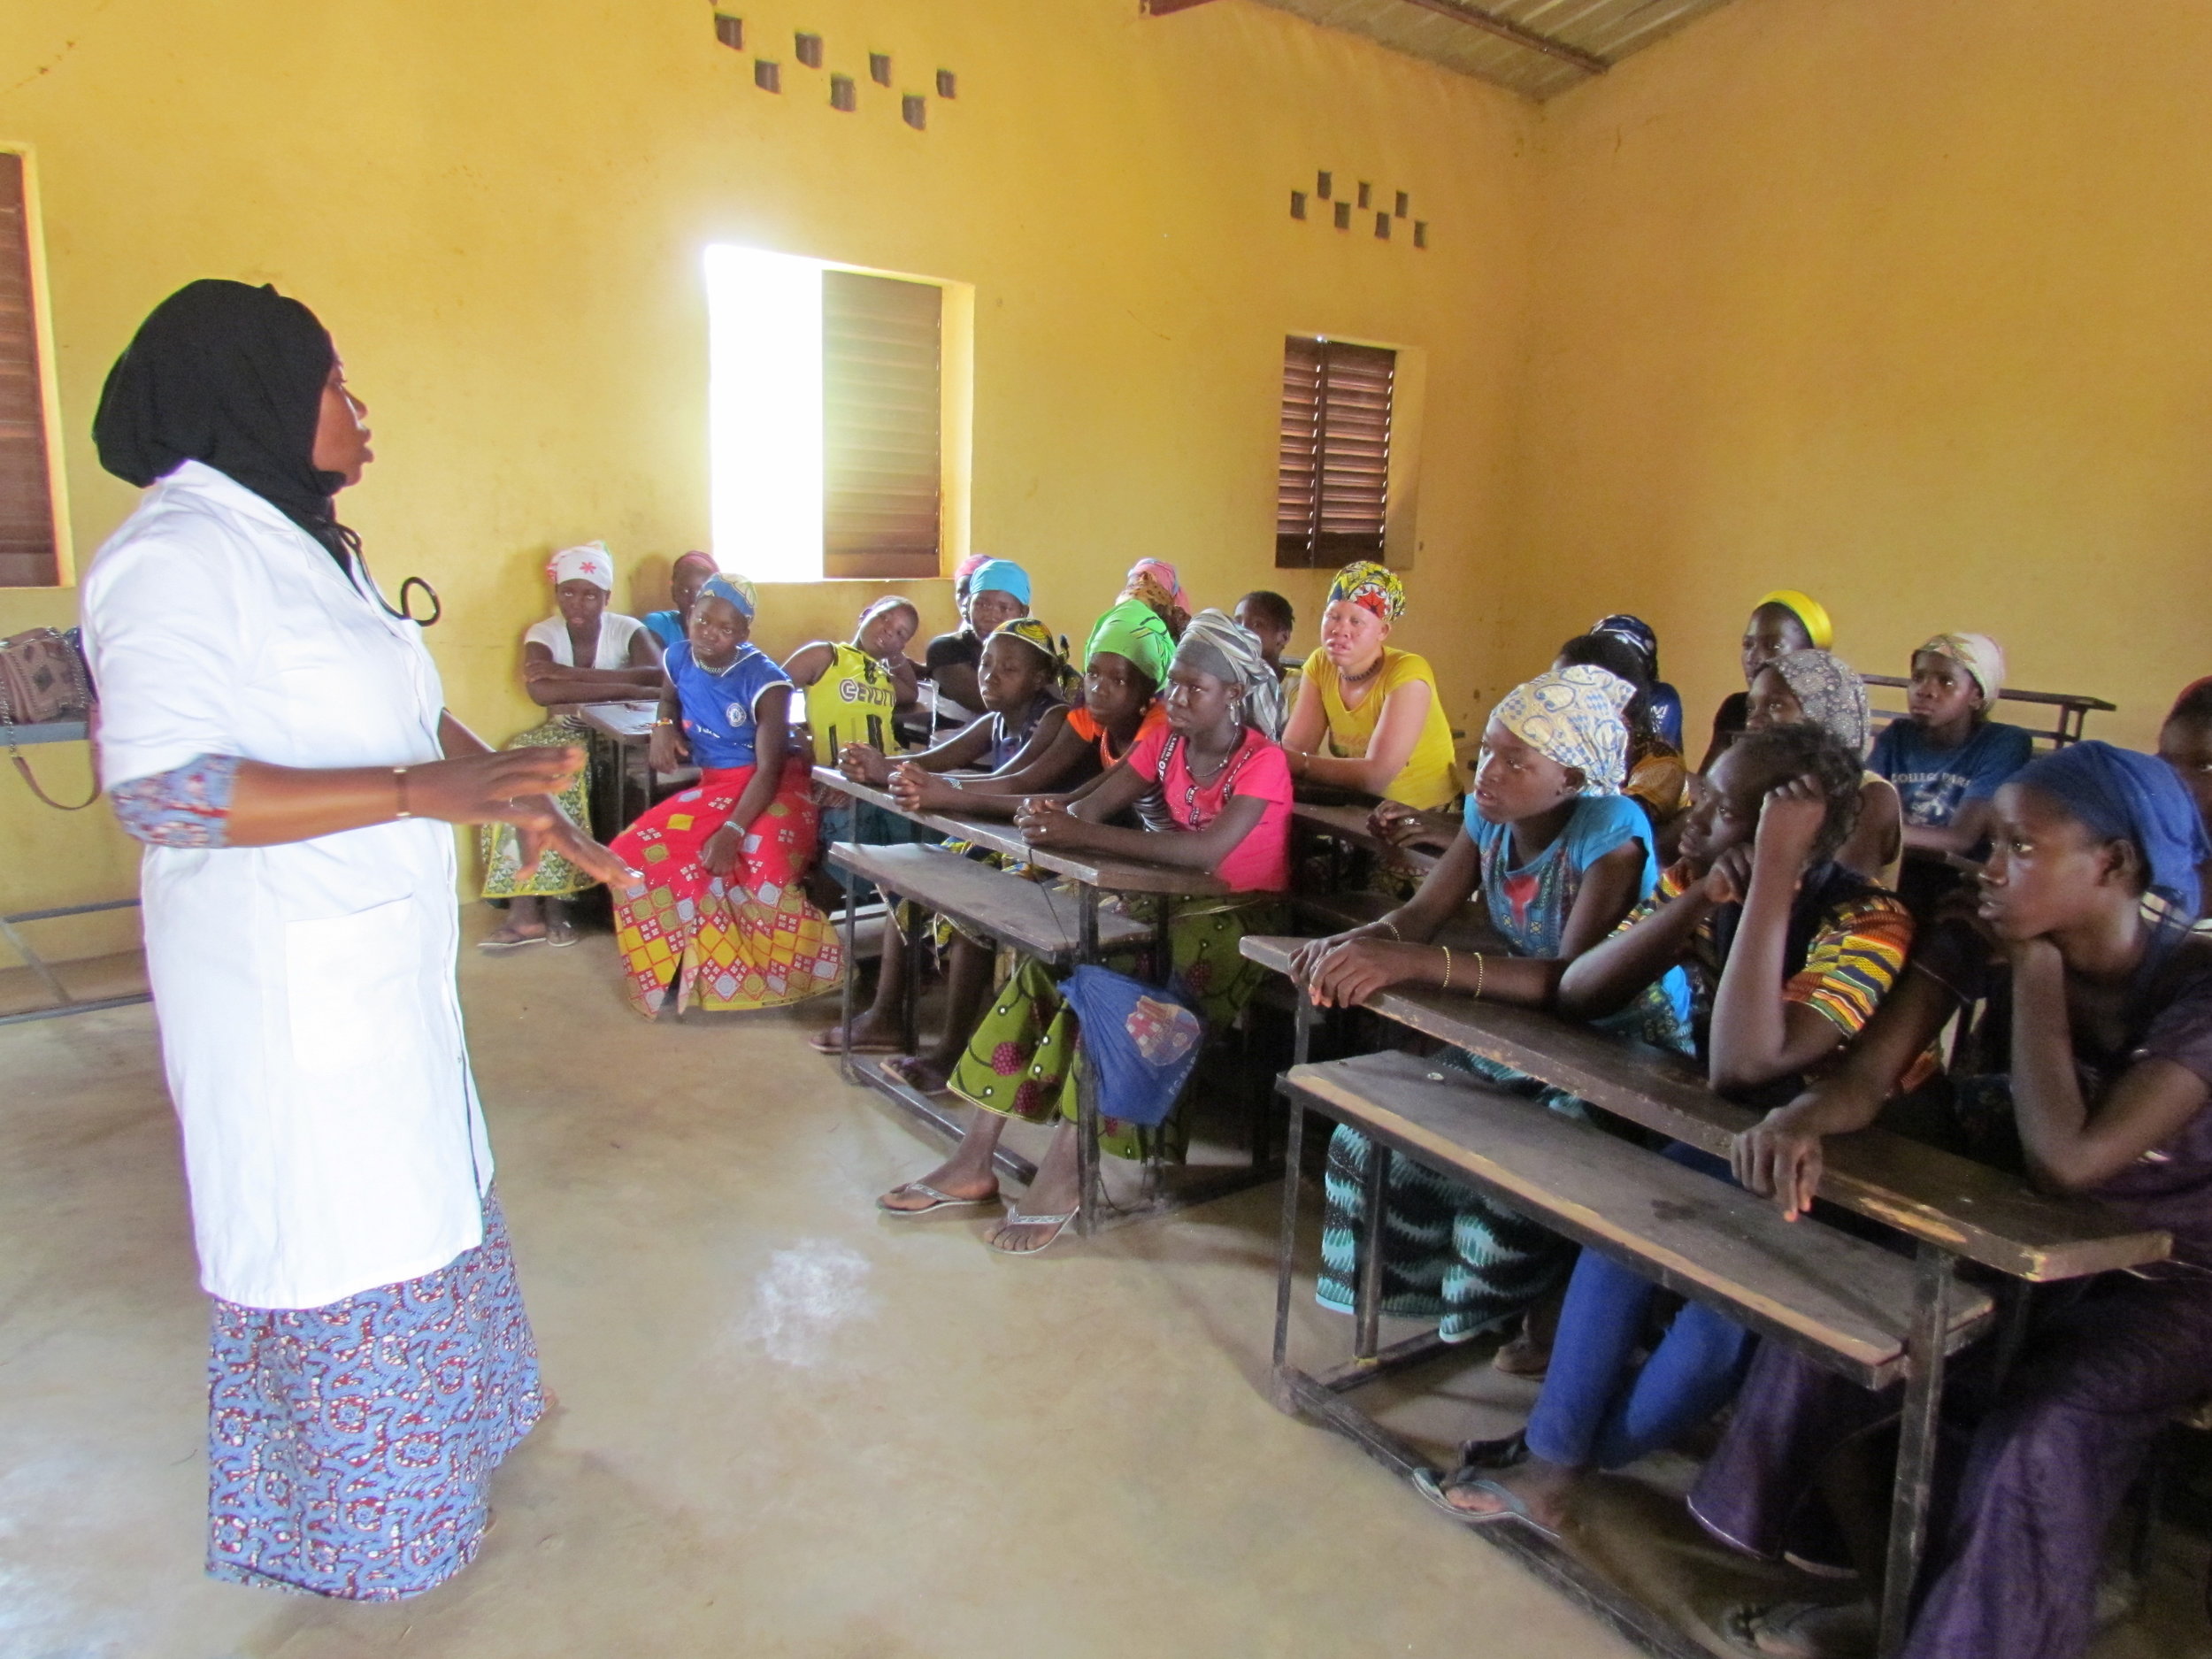  The girls of Kolimba listen intently as they consider what a career in medicine might mean for them. 